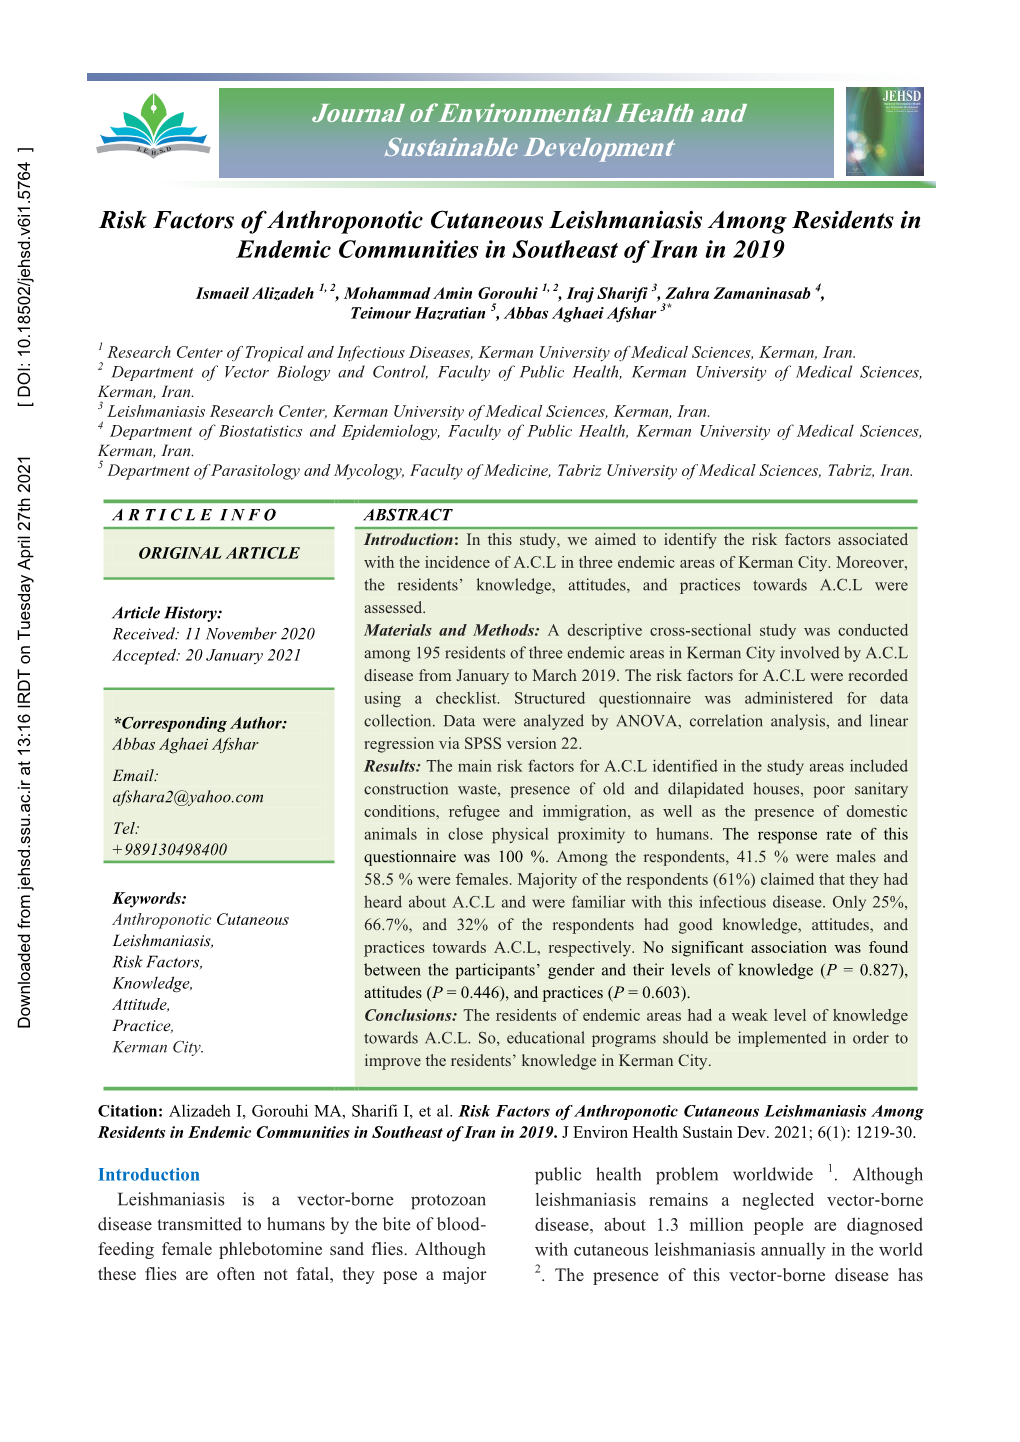 Risk Factors of Anthroponotic Cutaneous Leishmaniasis Among Residents in Endemic Communities in Southeast of Iran in 2019